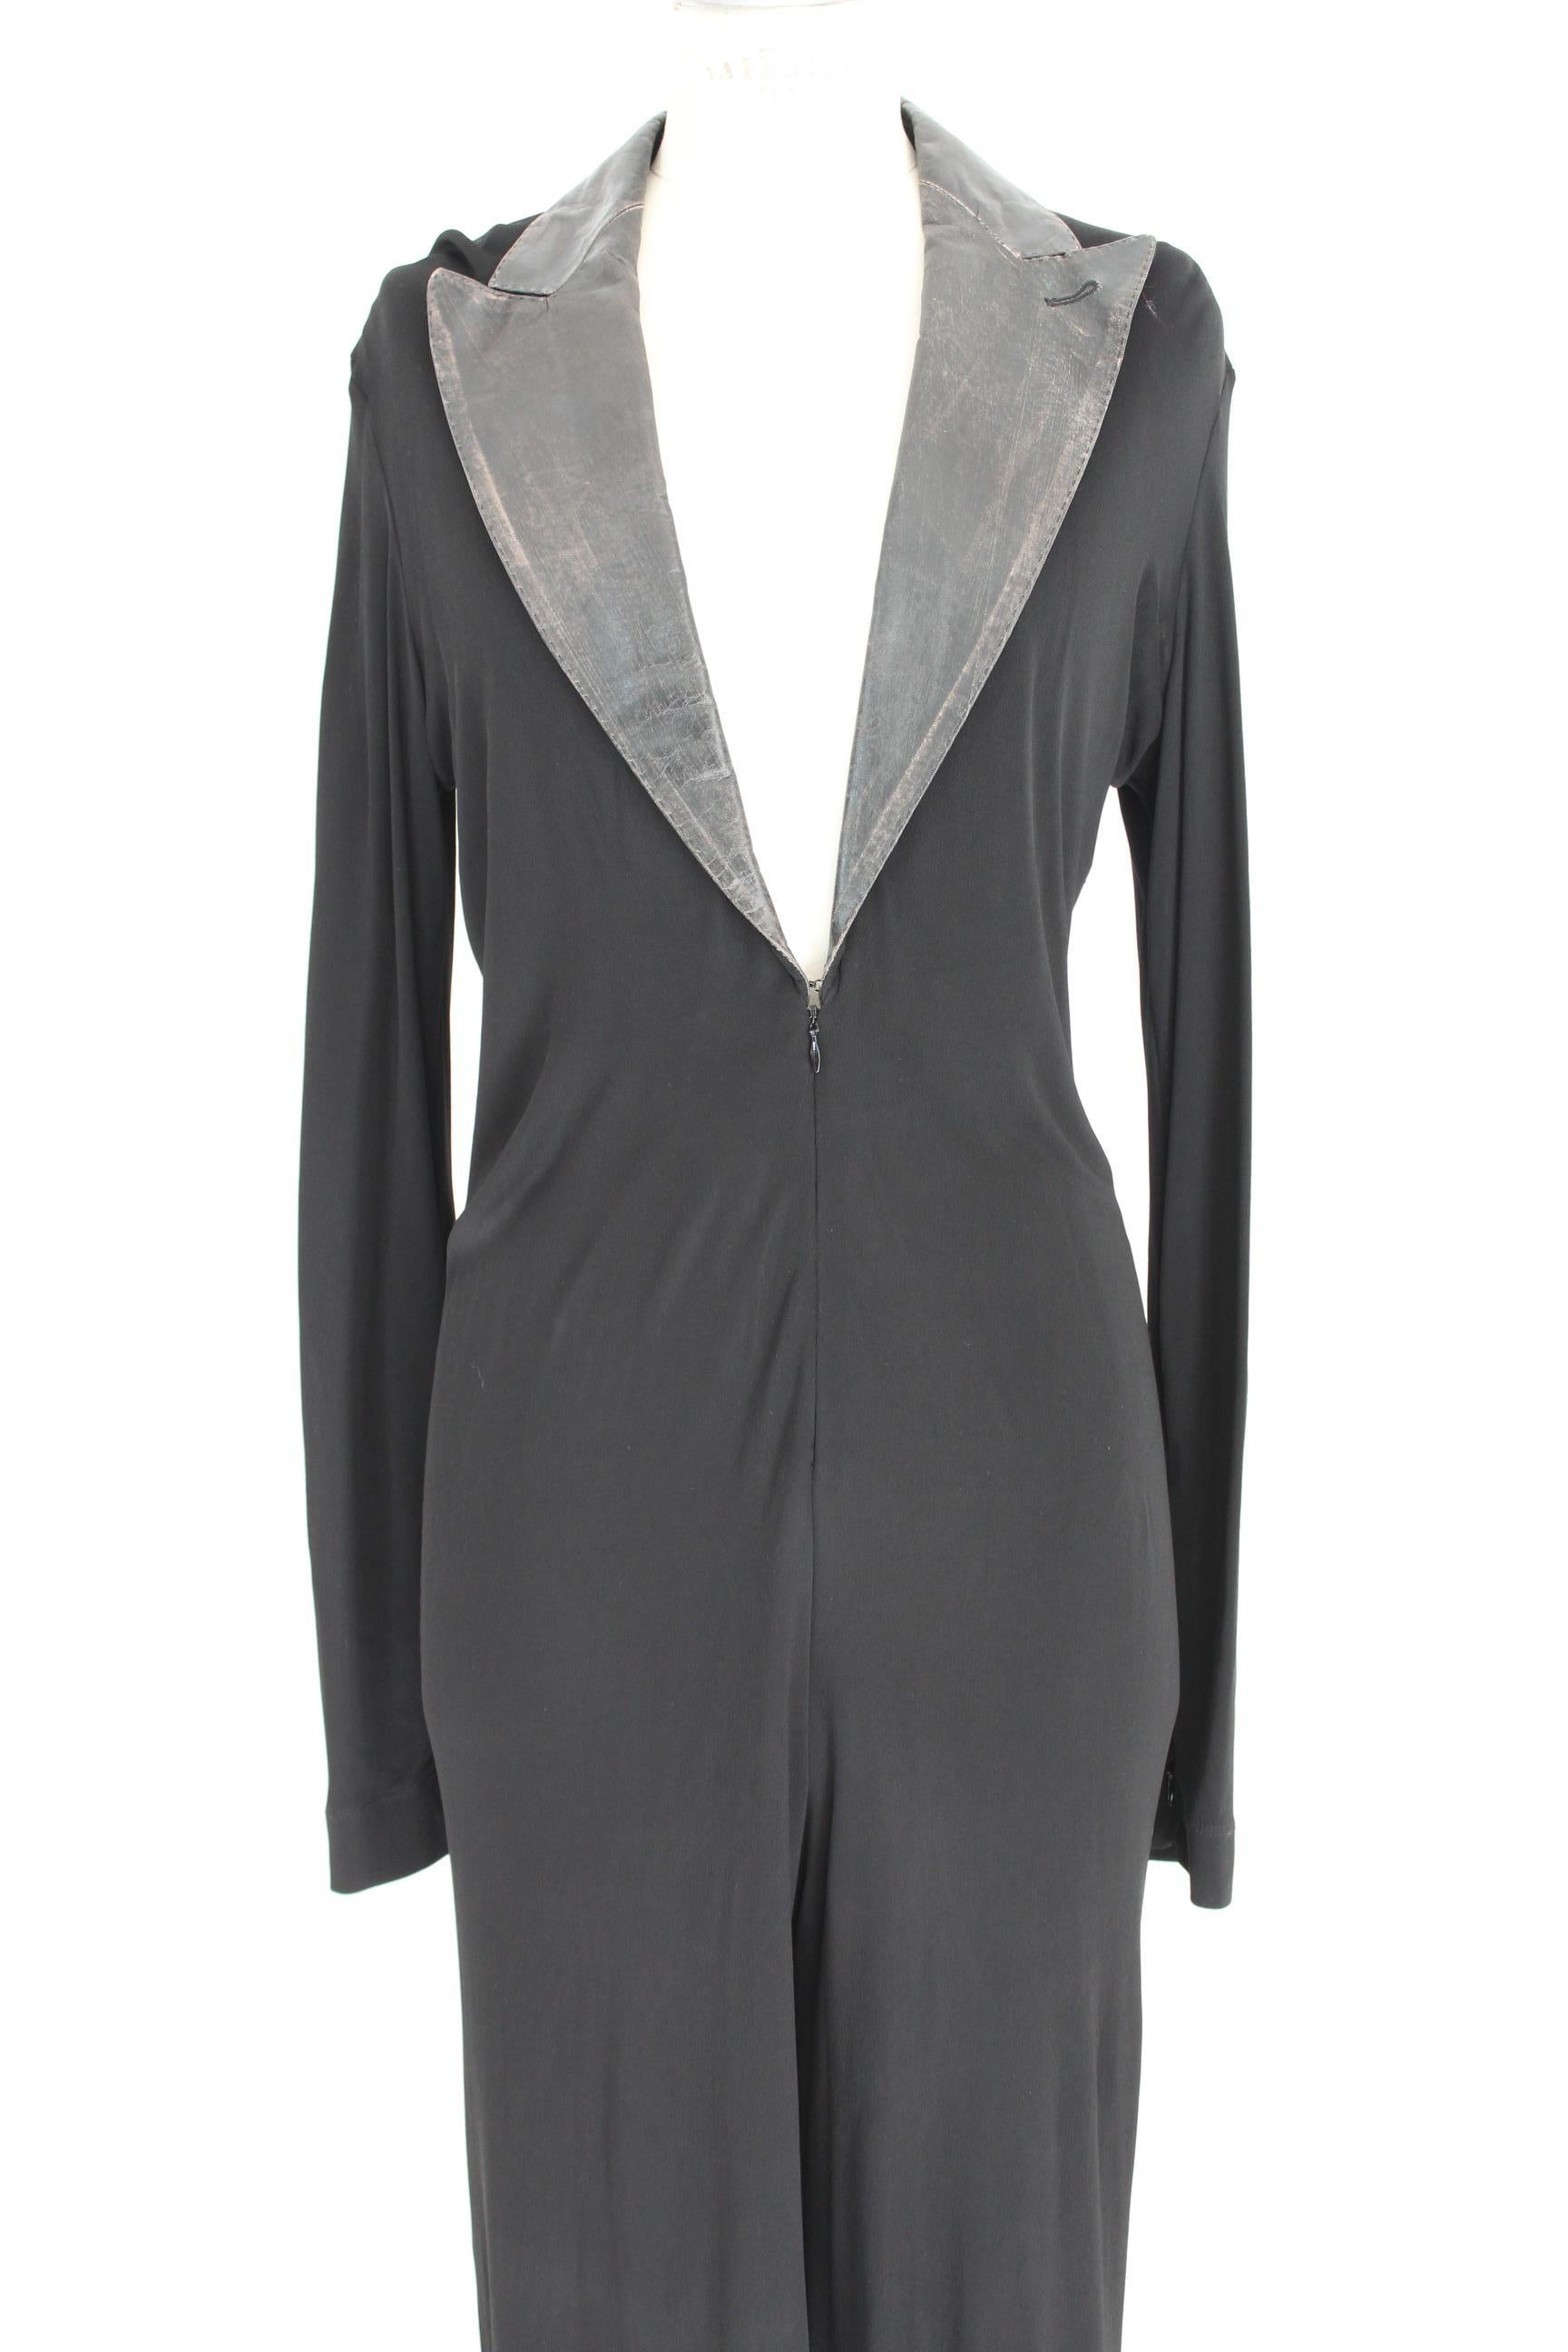 Jean Paul Gaultier elegant jumpsuit in soft rayon. Neck with leather reverse. Sensual neckline along the chest with zip closure. The jumpsuit has a soft fit. This jumpsuit is suitable for formal events such as gala dinners, elegant evenings and